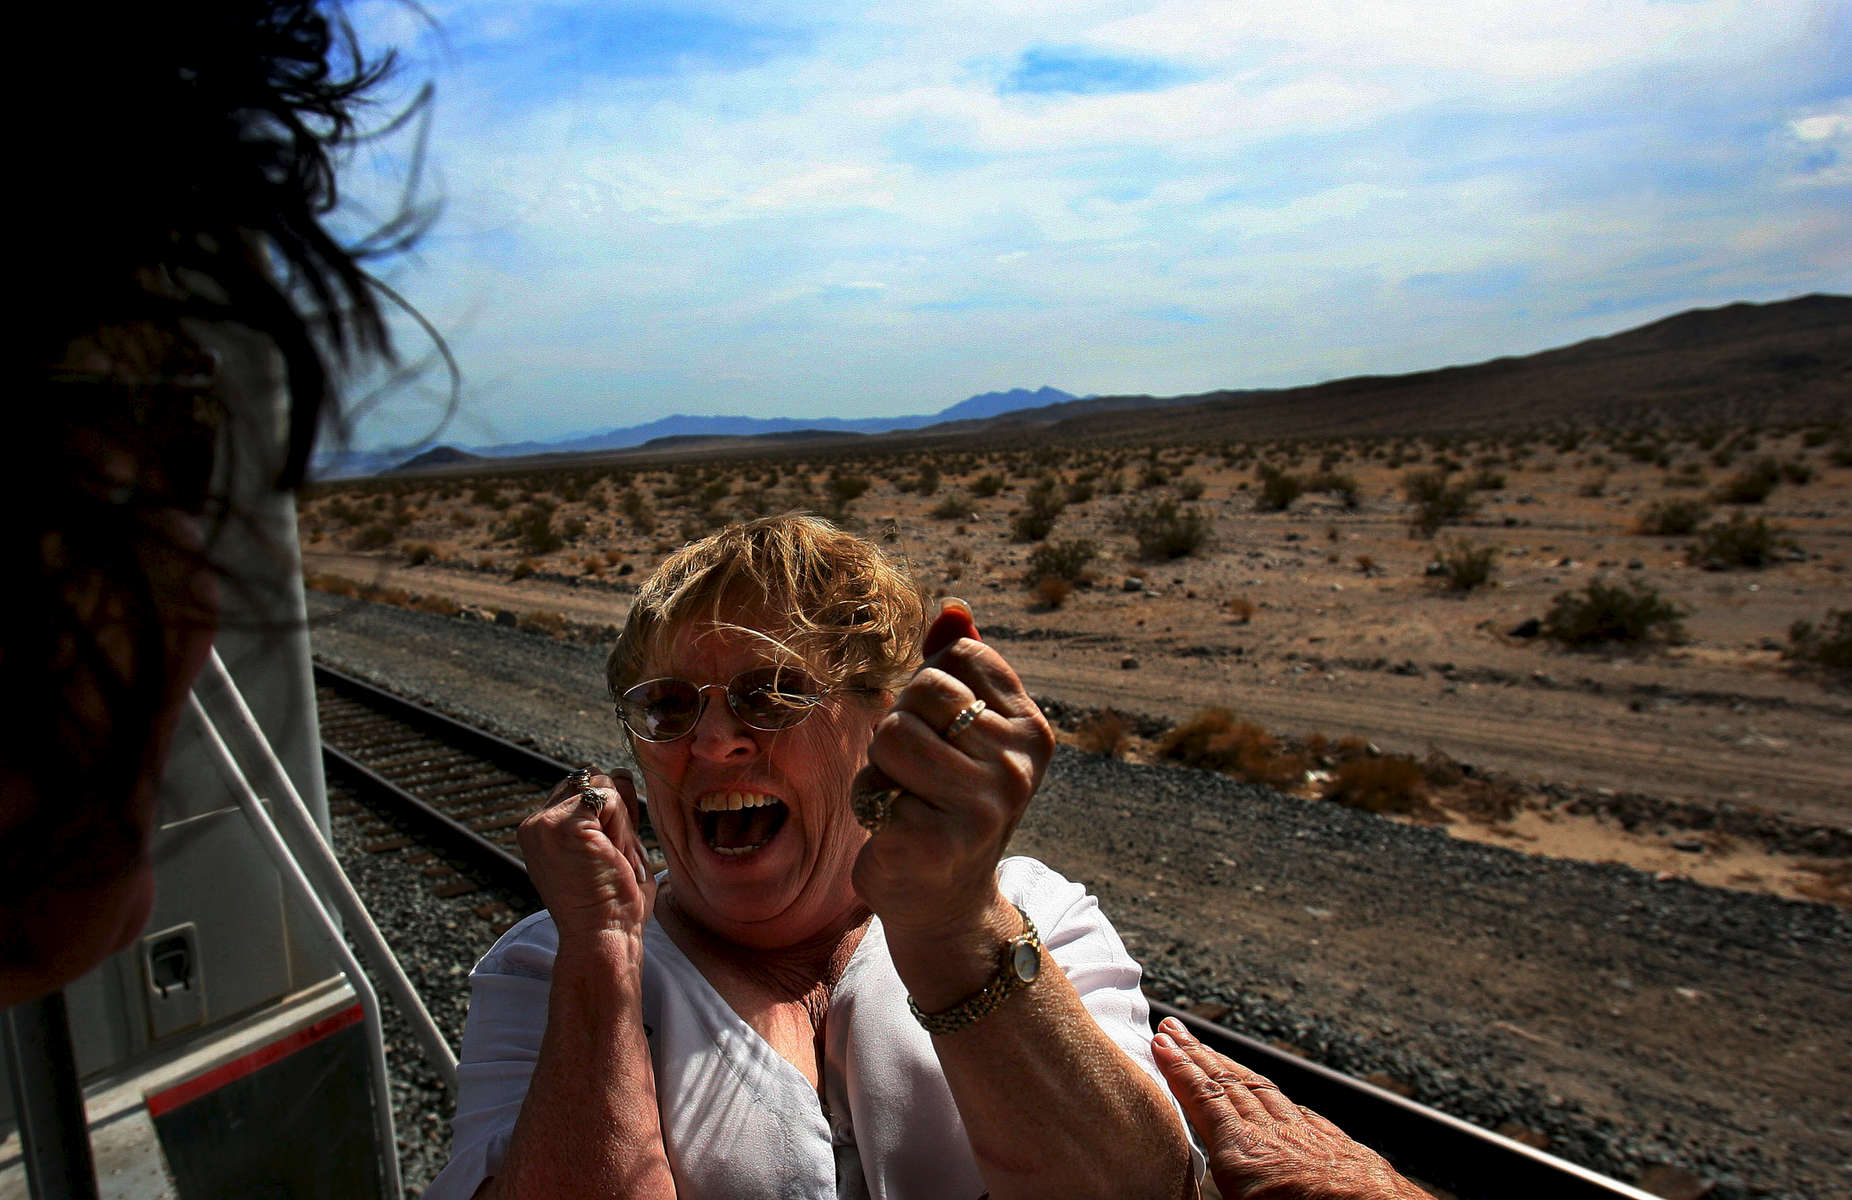 Carol Randall, a co-coordinator of the Kelso Flyer, is overwhelmed with emotion, turning to Marcia Bond and belting out, {quote}We did it{quote}, as they view the Mojave National Preserve from the rear plantform of the Tioga Pass rail car during the Kelso Flyer train ride. (The Press-Enterprise/ Mark Zaleski)